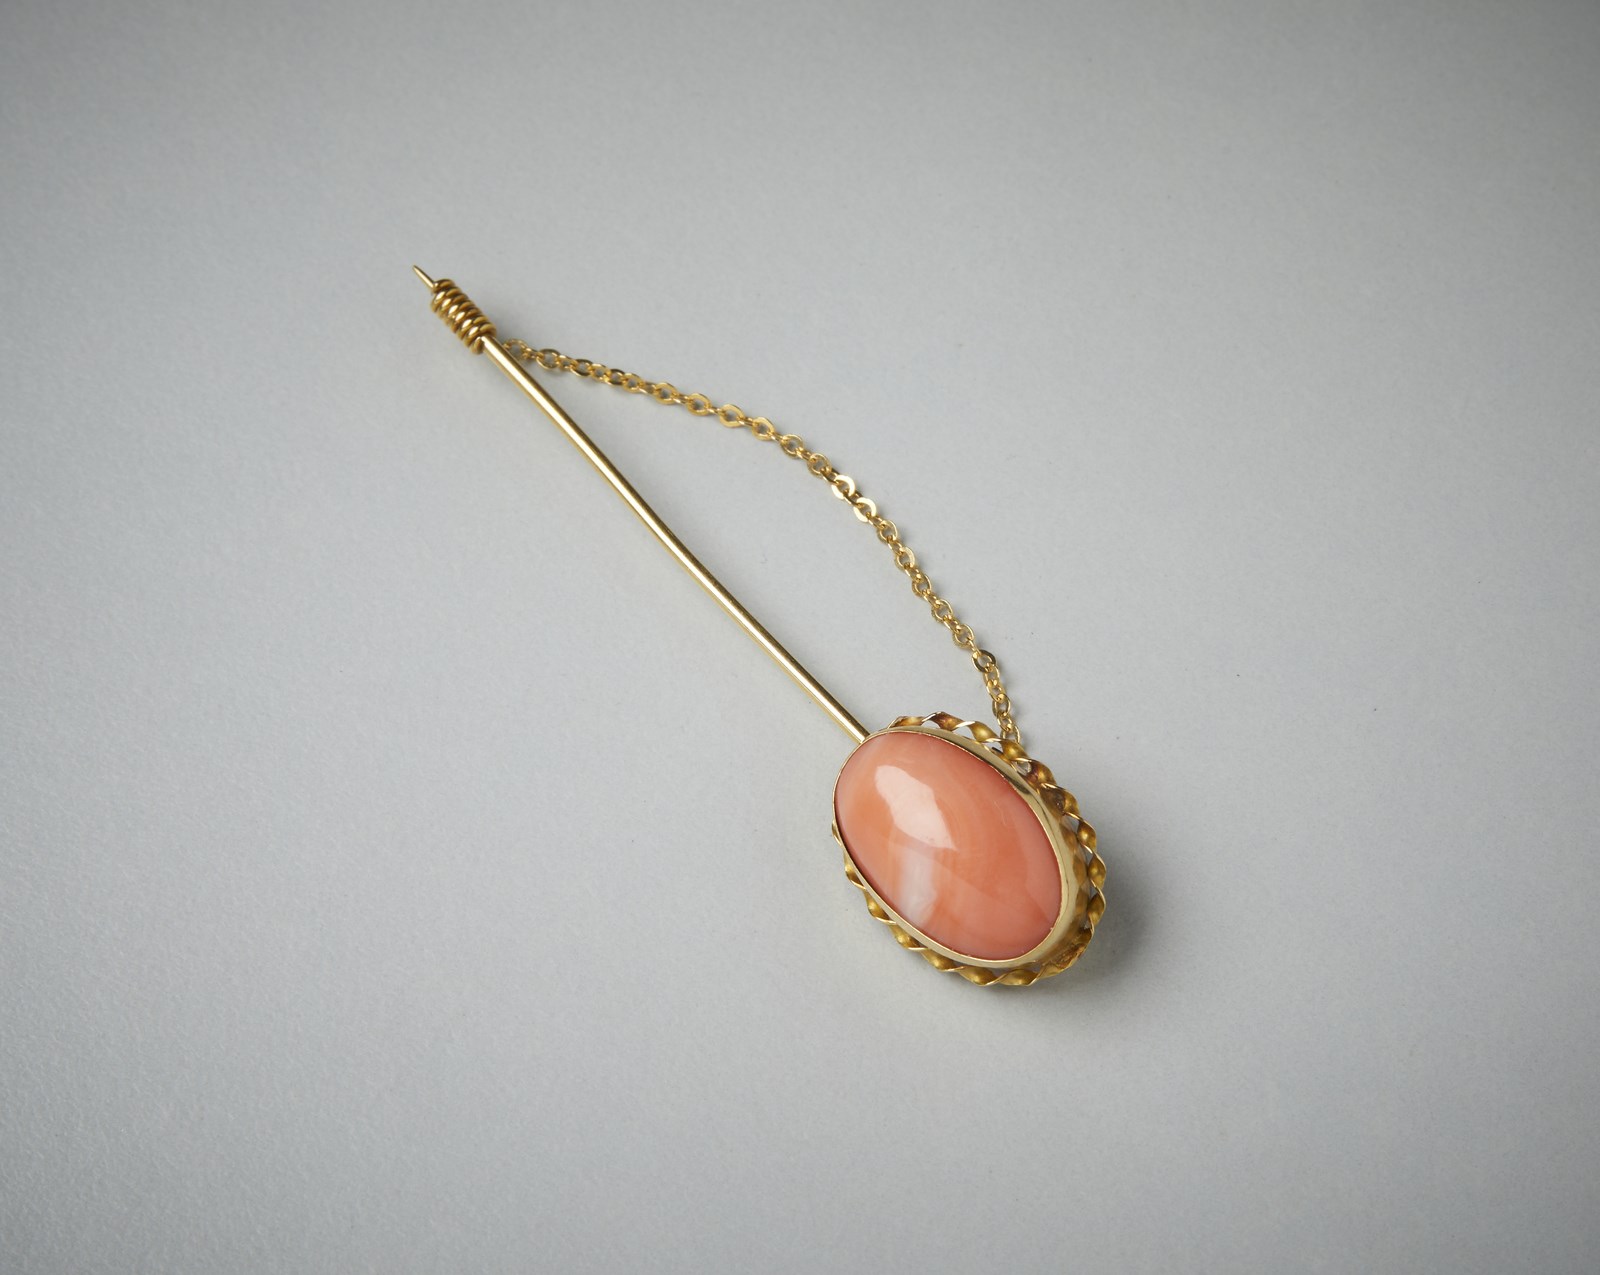 Jacket pin in yellow gold 750/1000 with pink coral cabochon. (. )